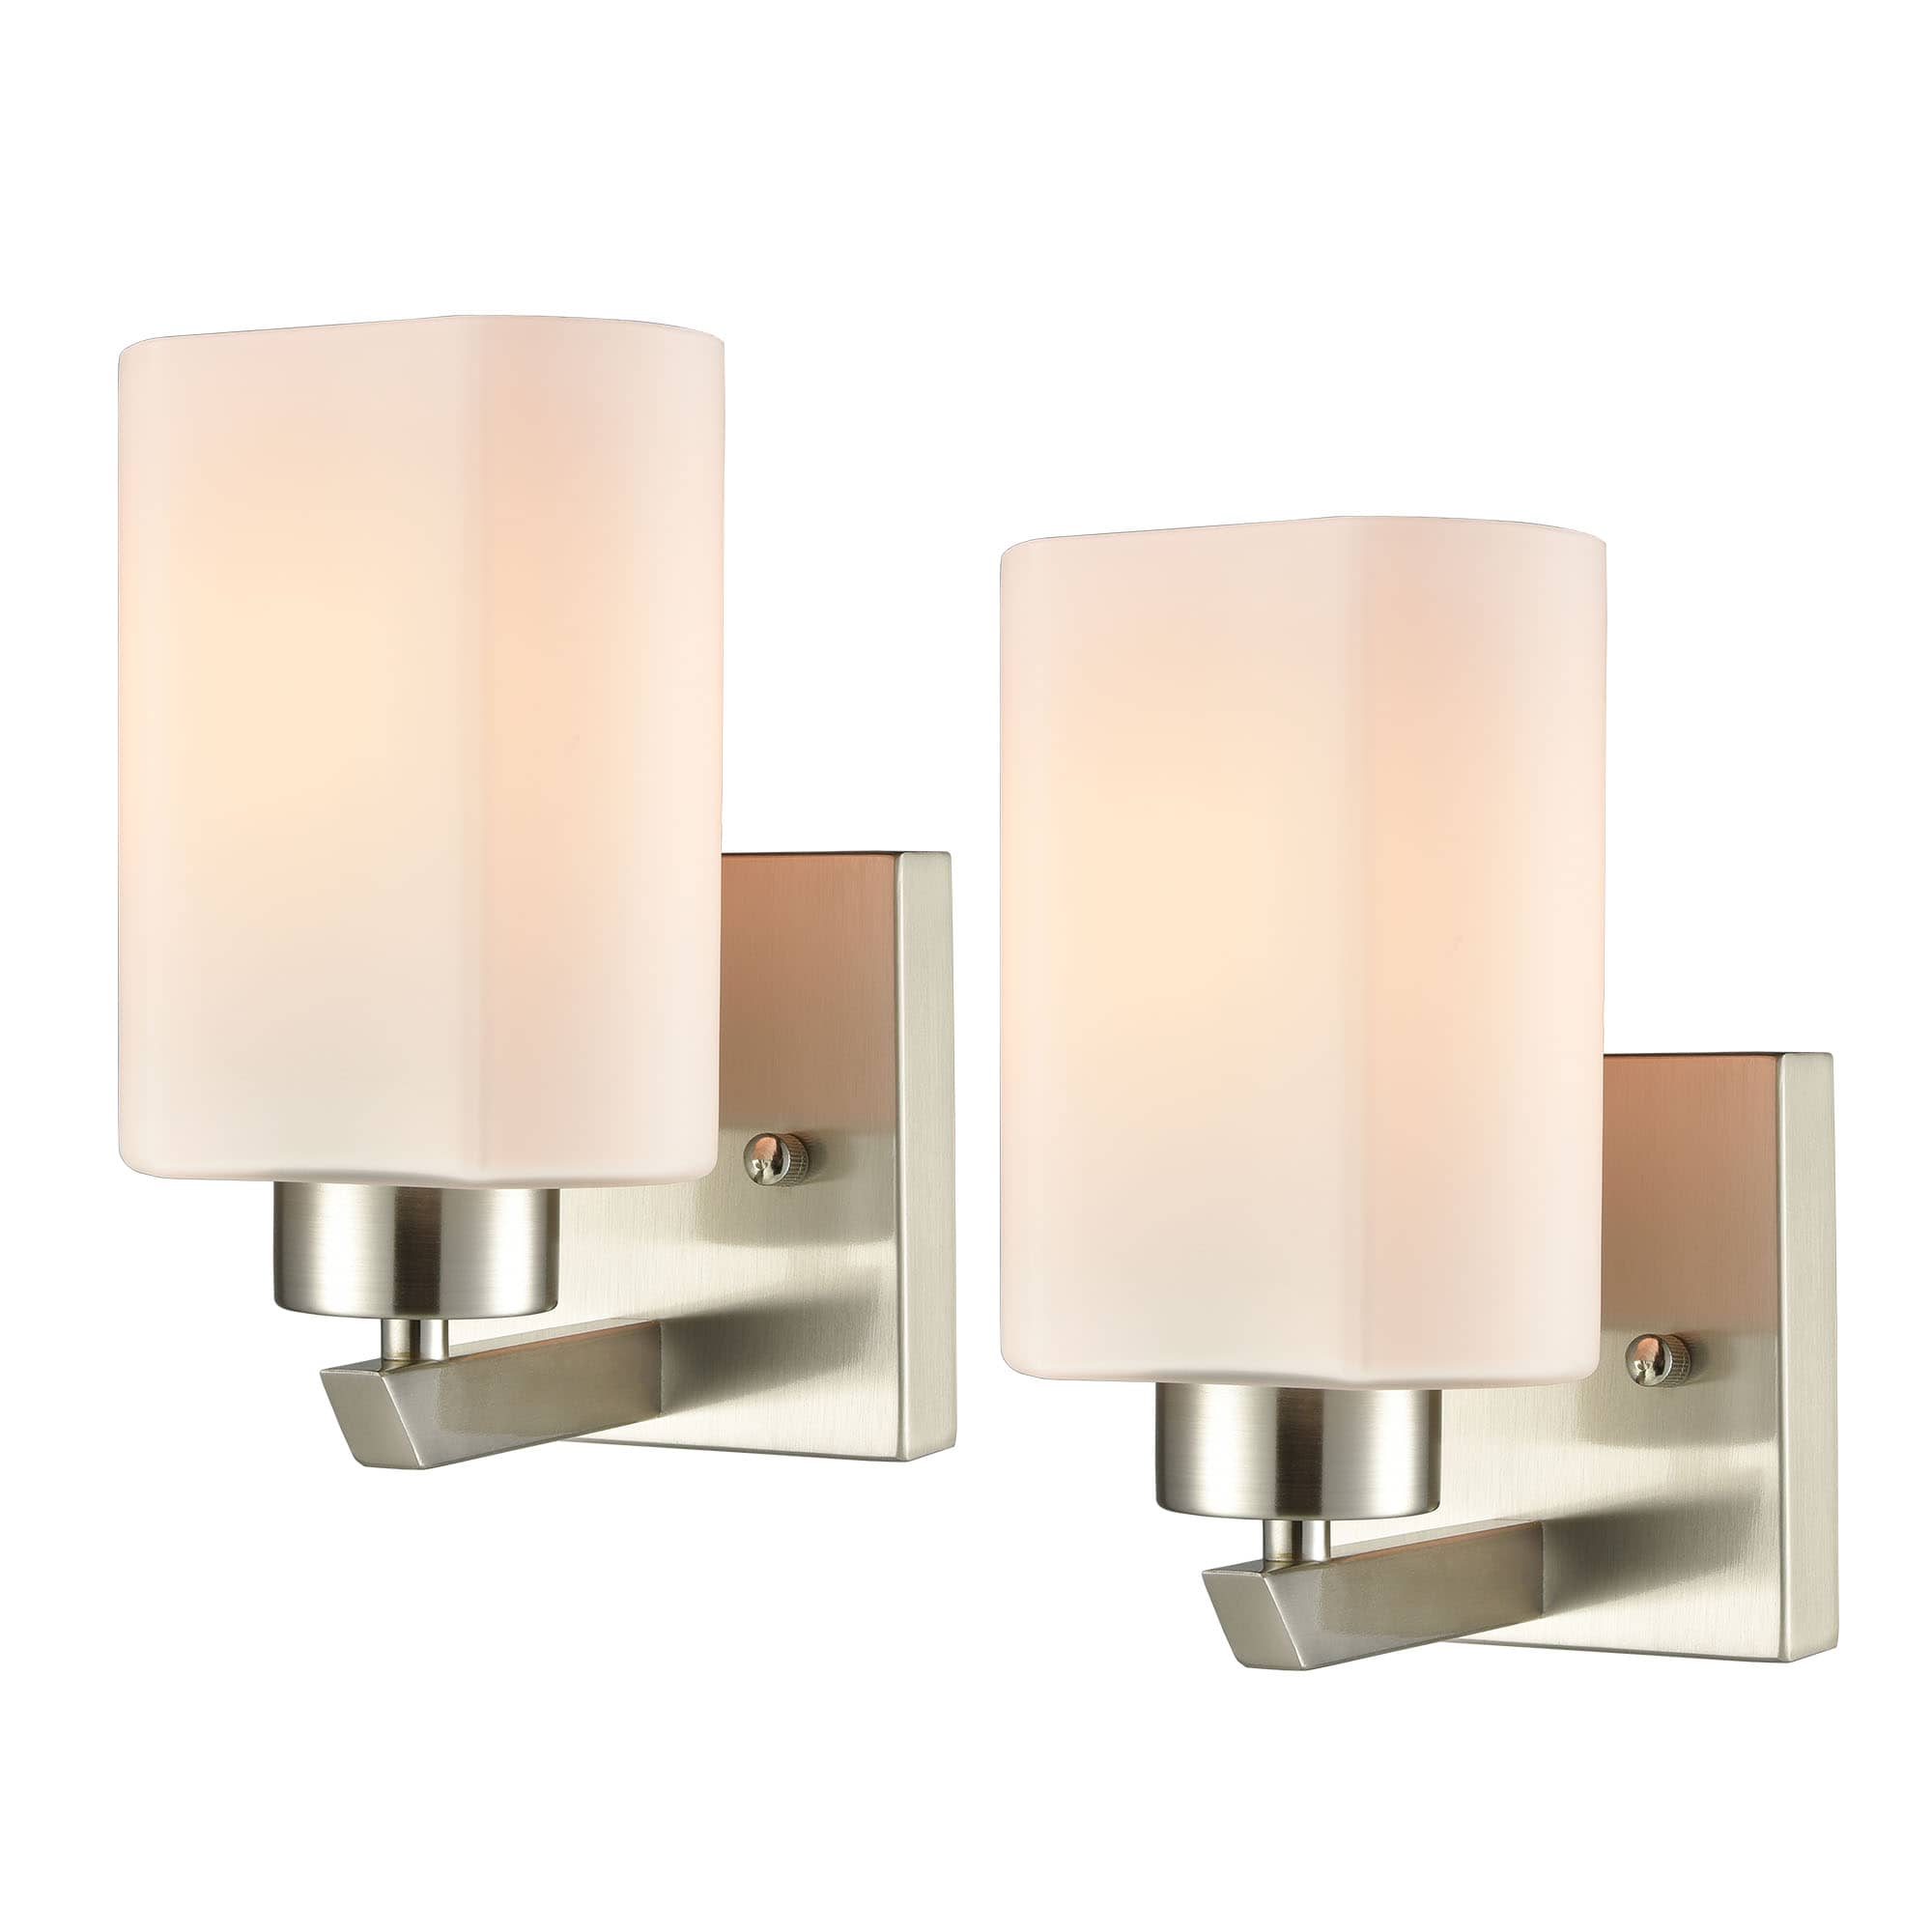 Modern Brush Nickel Wall Light Fixture with Off-white Glass Shade Set of 2